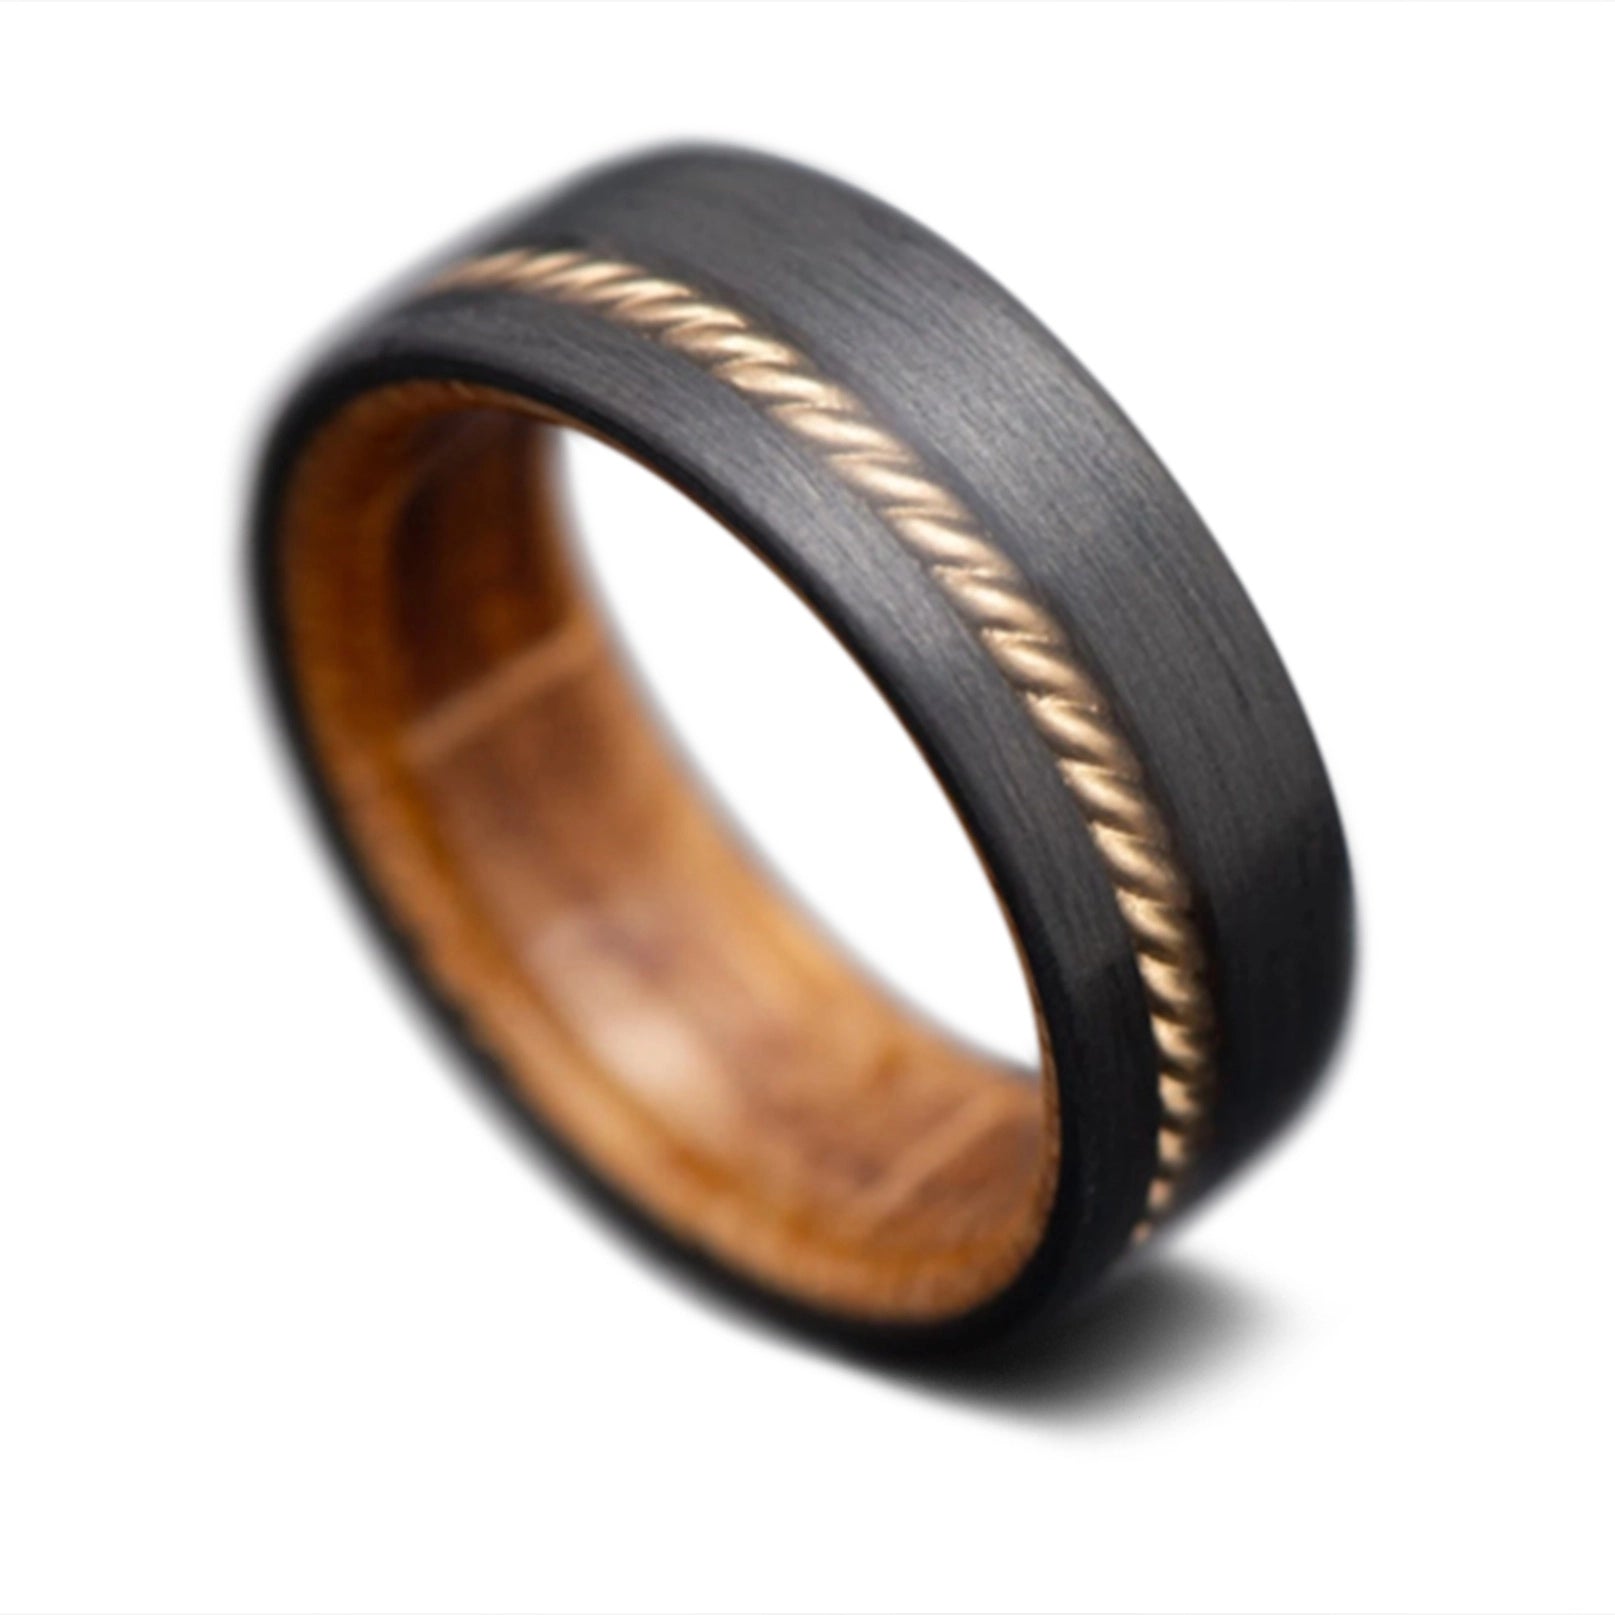 CarbonFiber Ring with Yellow Gold Rope And Whiskey barrel Wood Sleeve | Men's Wedding band